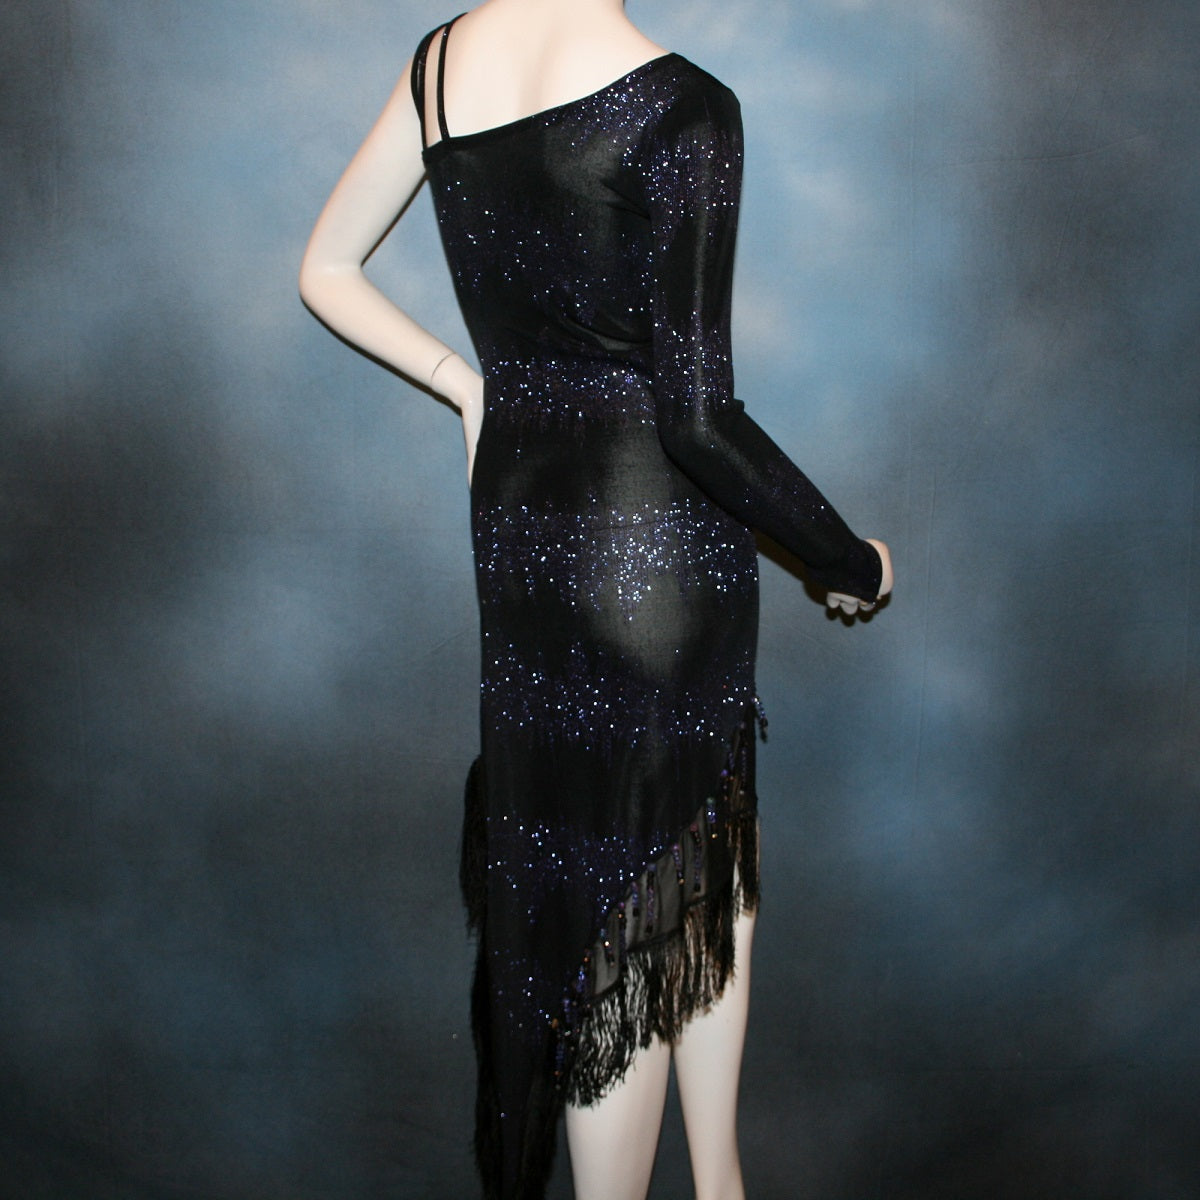 close back view of Latin/rhythm/tango dress created in black glitter slinky with an awesome electrifying tanzinite/perwinkle glitter pattern! It features one long sleeve, lattice work detailing up the left side, a short skirt line in front that angles down to a long peak in the back, with a sheer mesh inset, fringe & Swarovski hand beading in tanzanite & black.